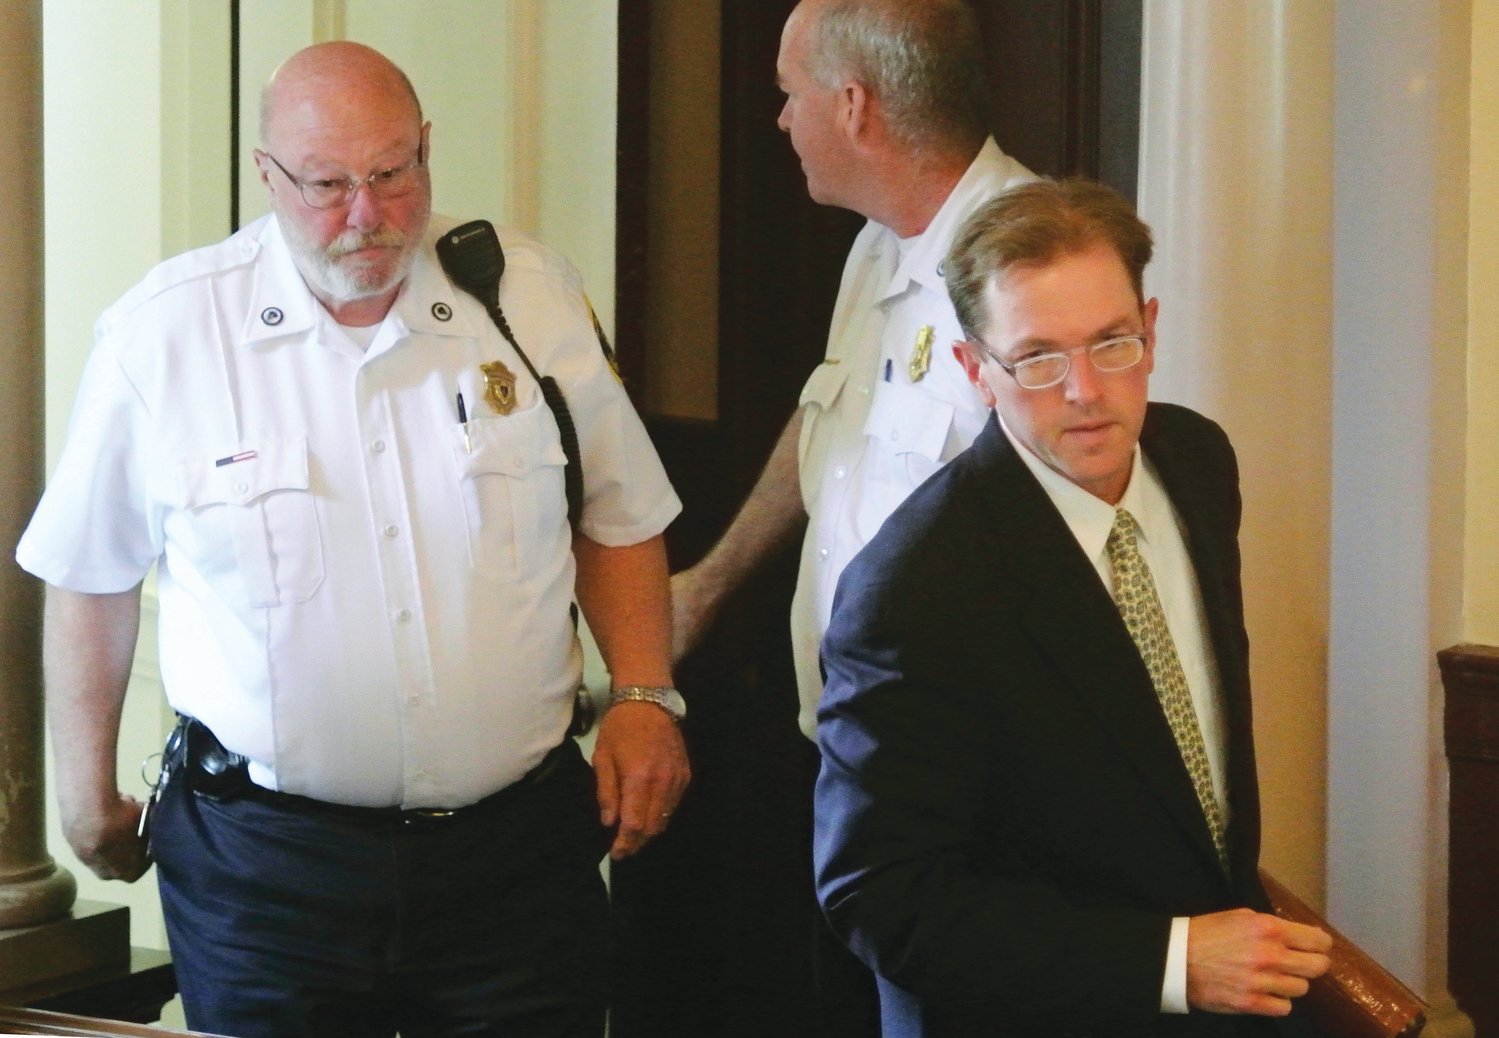 Thomas Toolan III, right, is brought into Barnstable Superior Court in 2013 during his second trial for the first-degree murder of Elizabeth Lochtefeld in her Nantucket home in 2004.